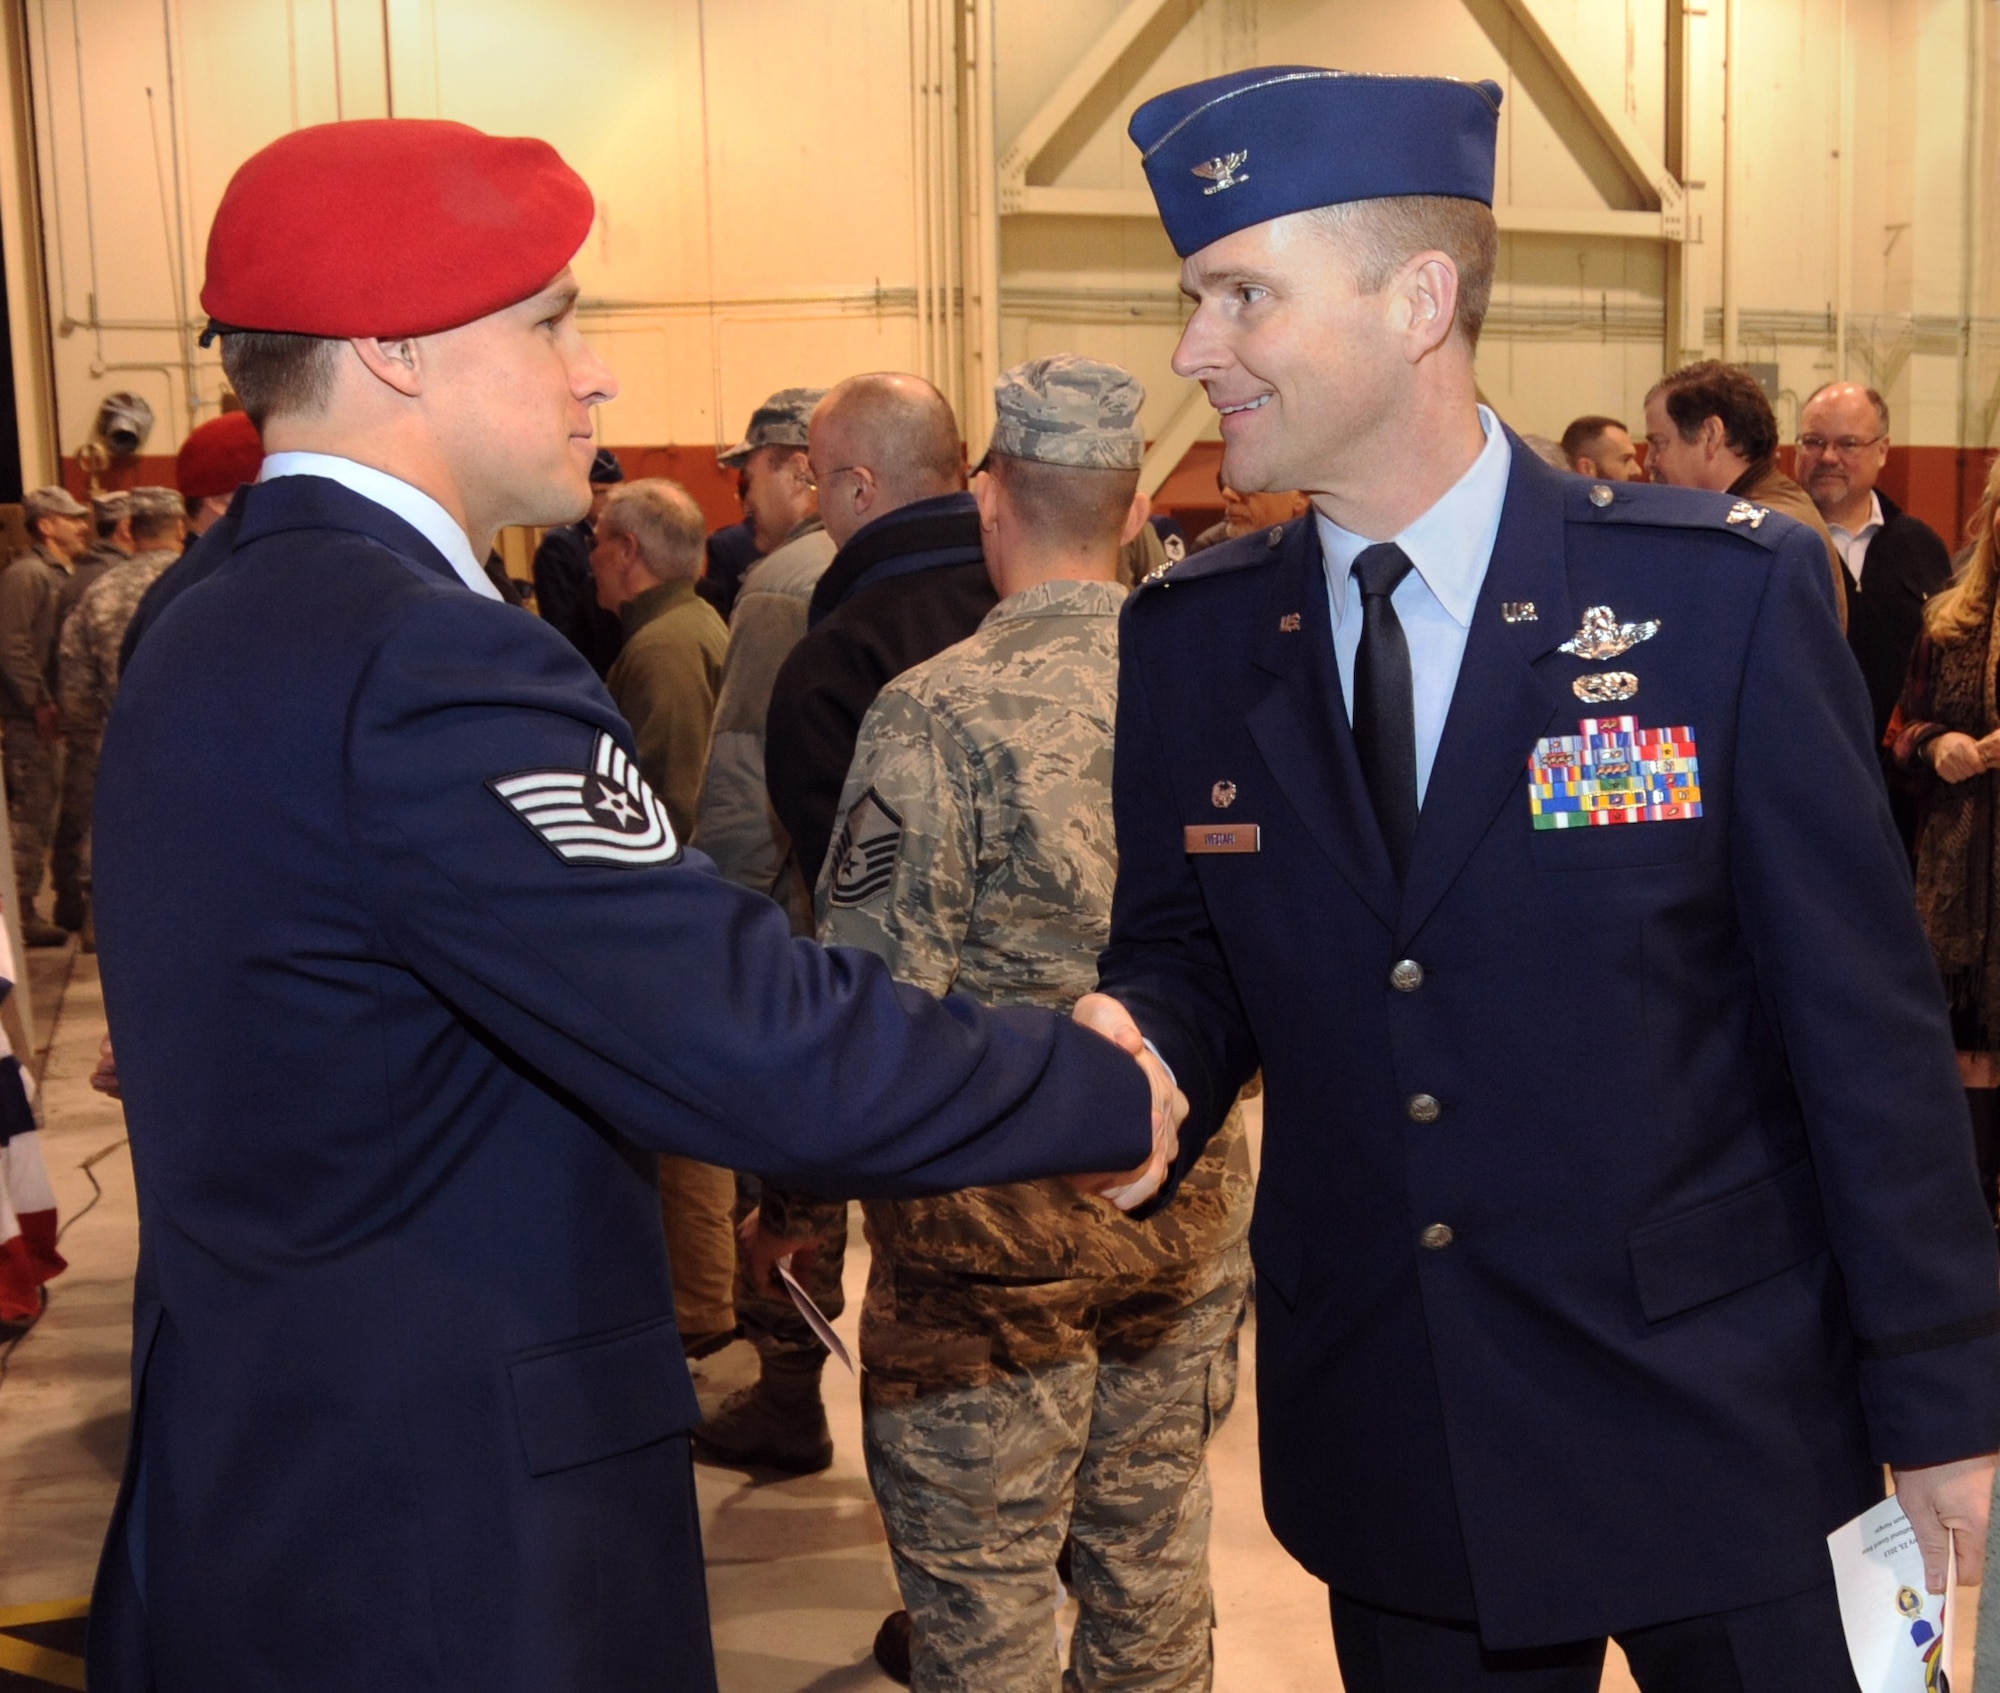 Oregon Air National Guard 142nd Fighter Wing Commander, Col. Rick Wedan, congratulates Tech. Sgt. Douglas J. Matthews, of the 125th Special Tactics Squadron, following his awarding of the Purple Heart Medal at a ceremony held at the Portland Air National Guard Base, Portland, Ore., Jan. 23. Matthews was joined by five of his fellow Airmen, who received Bronze Star Medals earned during recent deployments to the Middle East. U.S. Air Force Lt. Gen. Eric E. Fiel, commander of Air Force Special Operations Command, flew in from his headquarters at Hulburt Field, Fla., for the ceremony. (Oregon Air National Guard by Tech. Sgt. John Hughel, 142nd Fighter Wing Public Affairs/Released)